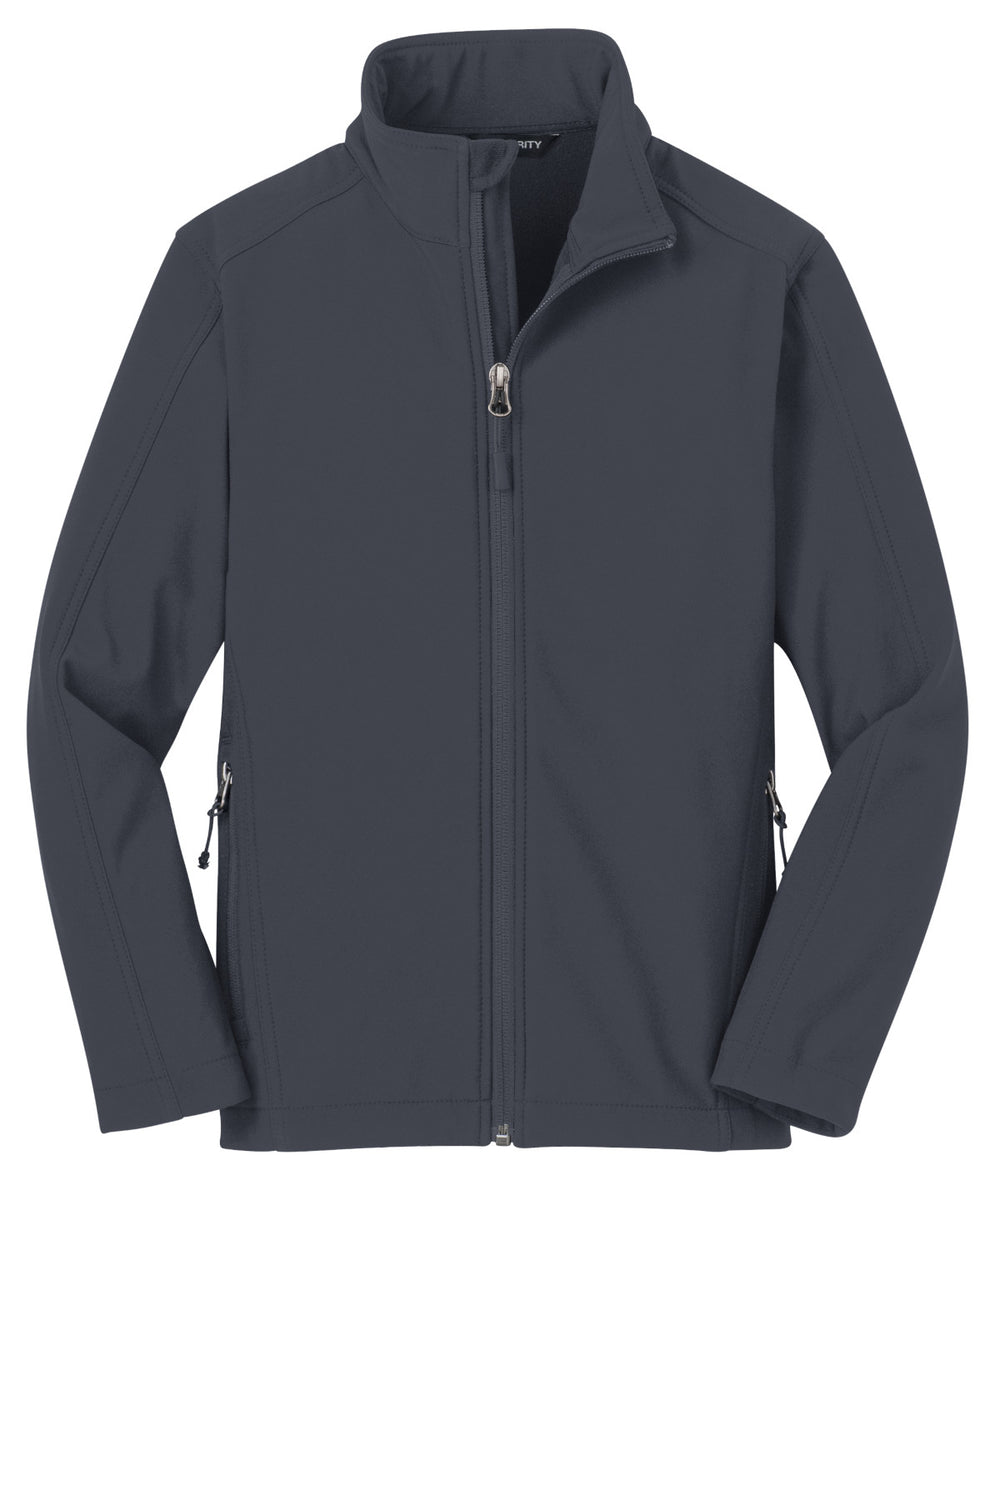 CCS - Y317 Port Authority Youth Core Soft Shell Jacket - Premium School Uniform from Pat's Monograms - Just $40! Shop now at Pat's Monograms